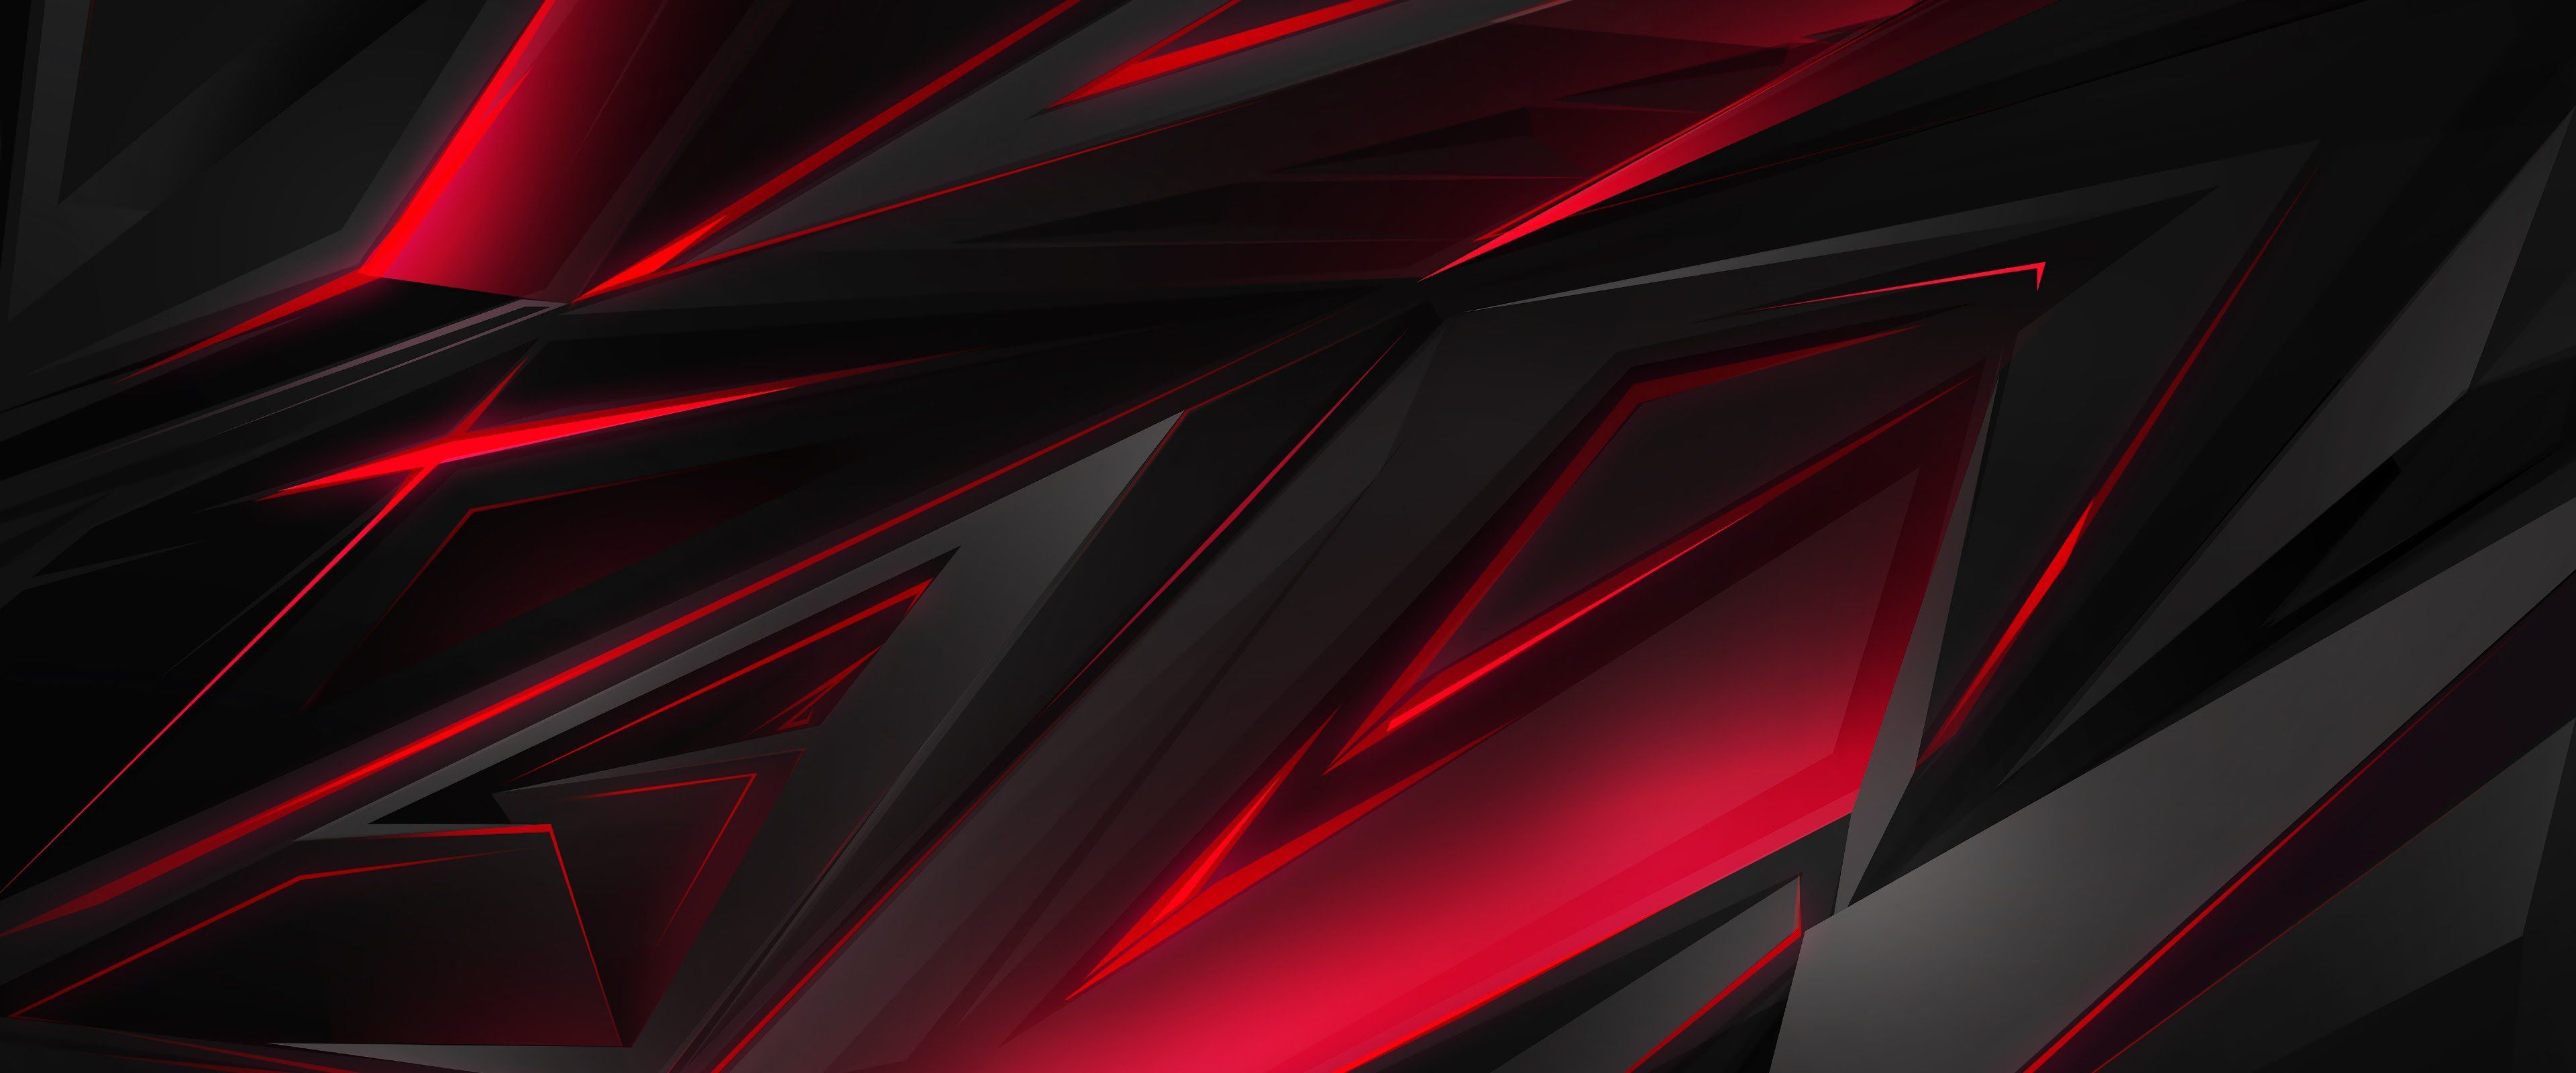 Free download Black Red Abstract Polygon 3D 4k Red Gaming Wallpaper 4k [3840x1600] for your Desktop, Mobile & Tablet. Explore Gaming Wallpaper 4kK Gaming Wallpaper, 4K Gaming Wallpaper, Gaming Wallpaper